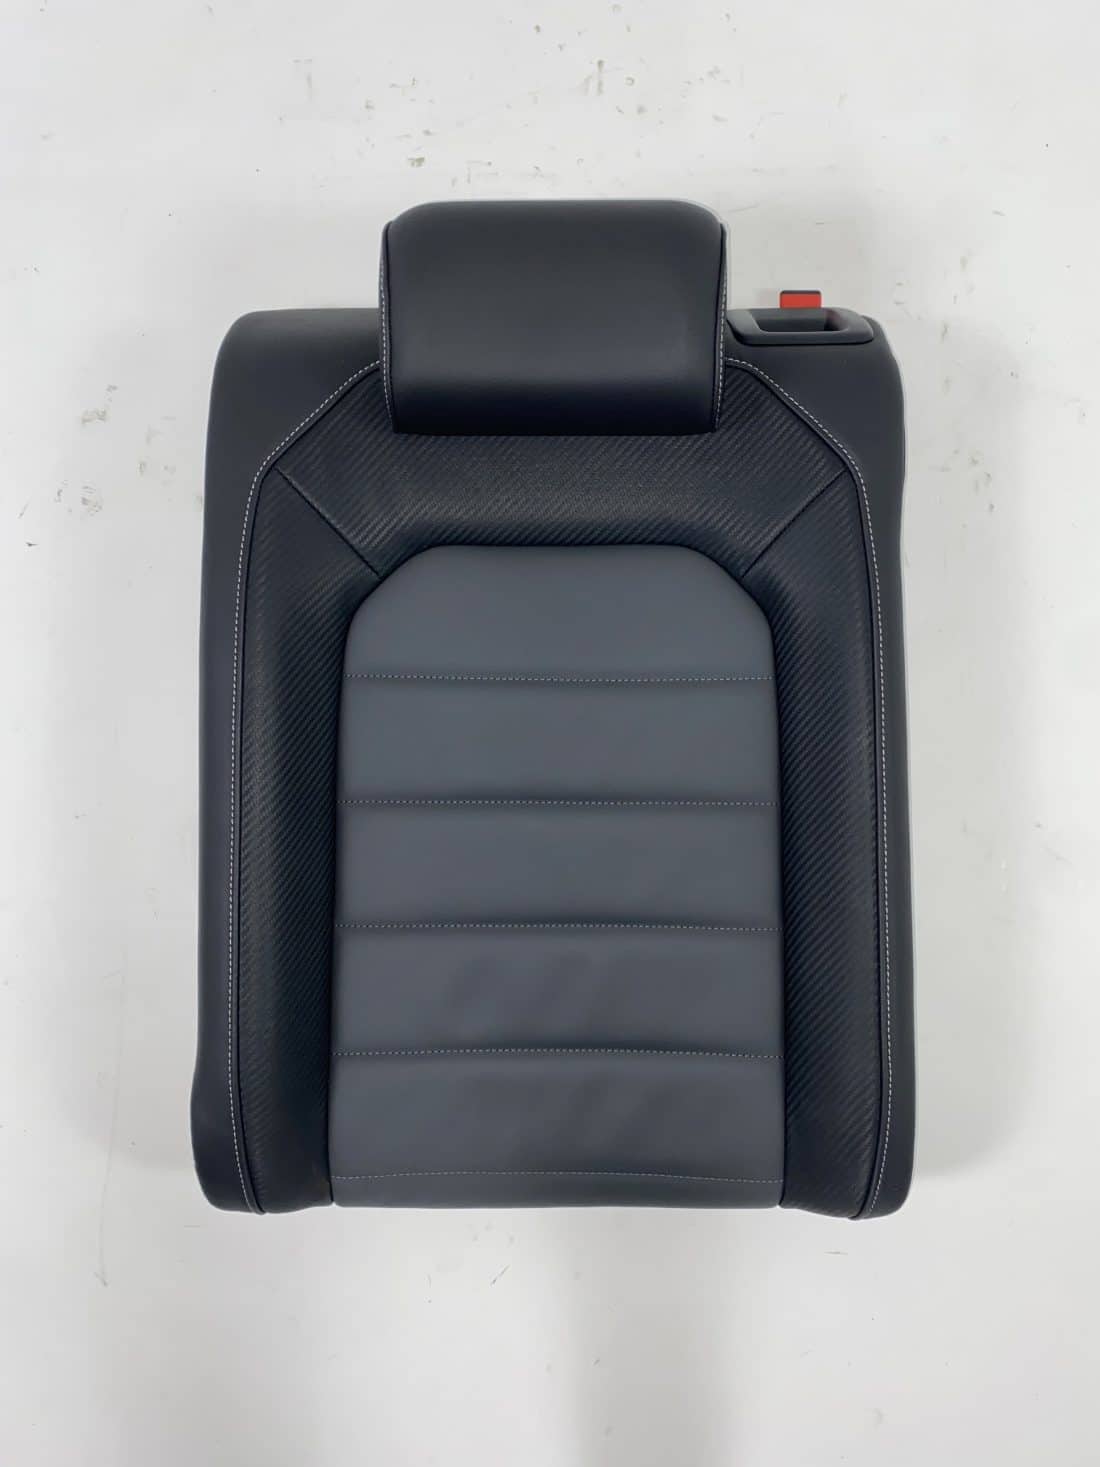 Trp Post Container Data Trp Post Id 13260 Interior Vw Golf 7 R Leather Carbon Black Trp Post Container